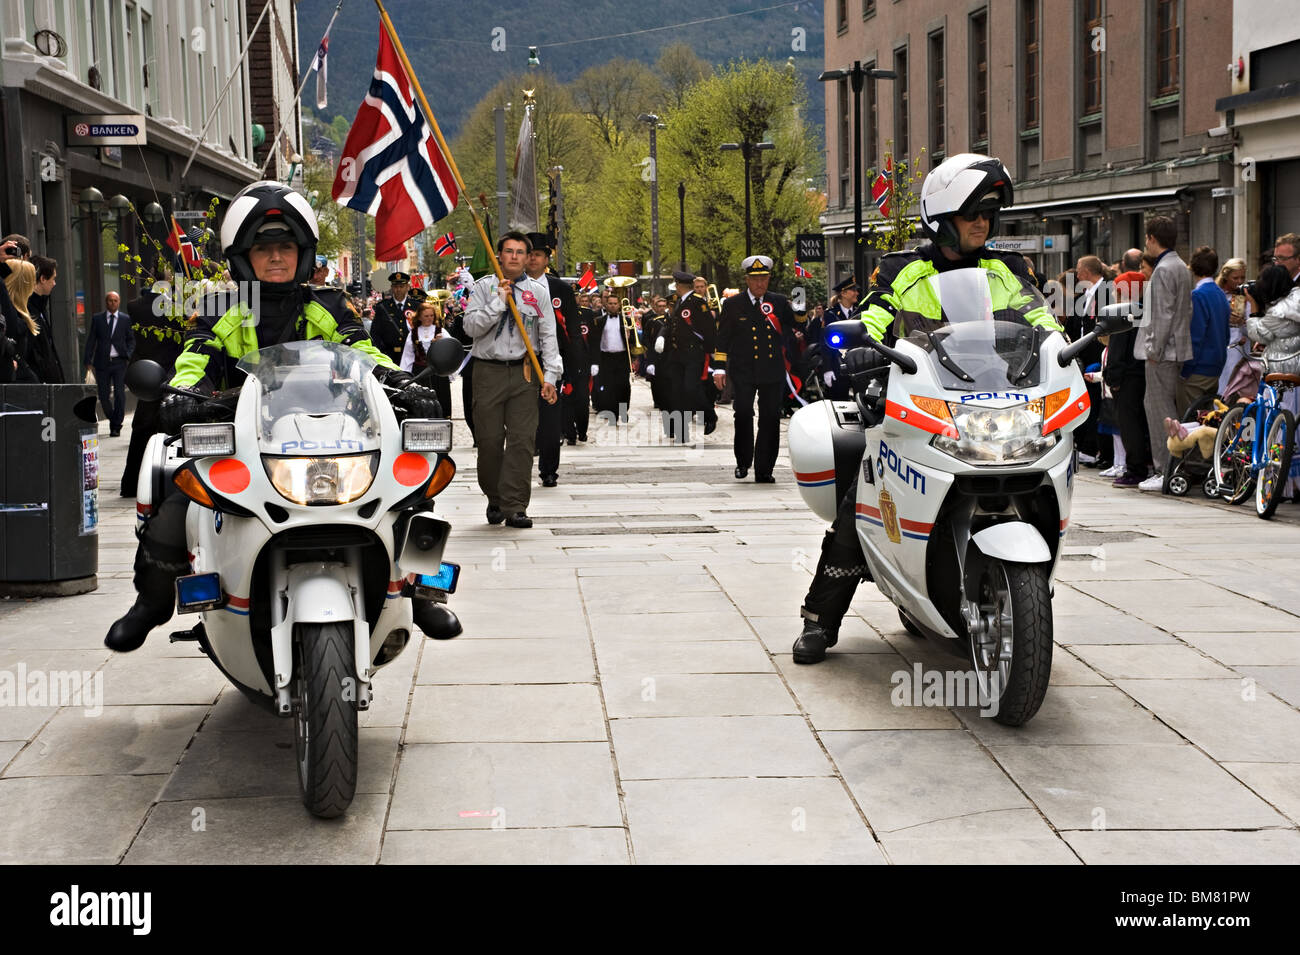 Norwegian Police Motorcycles Lead the Traditional 17 May Independence Day Parade in Bergen Norway Stock Photo